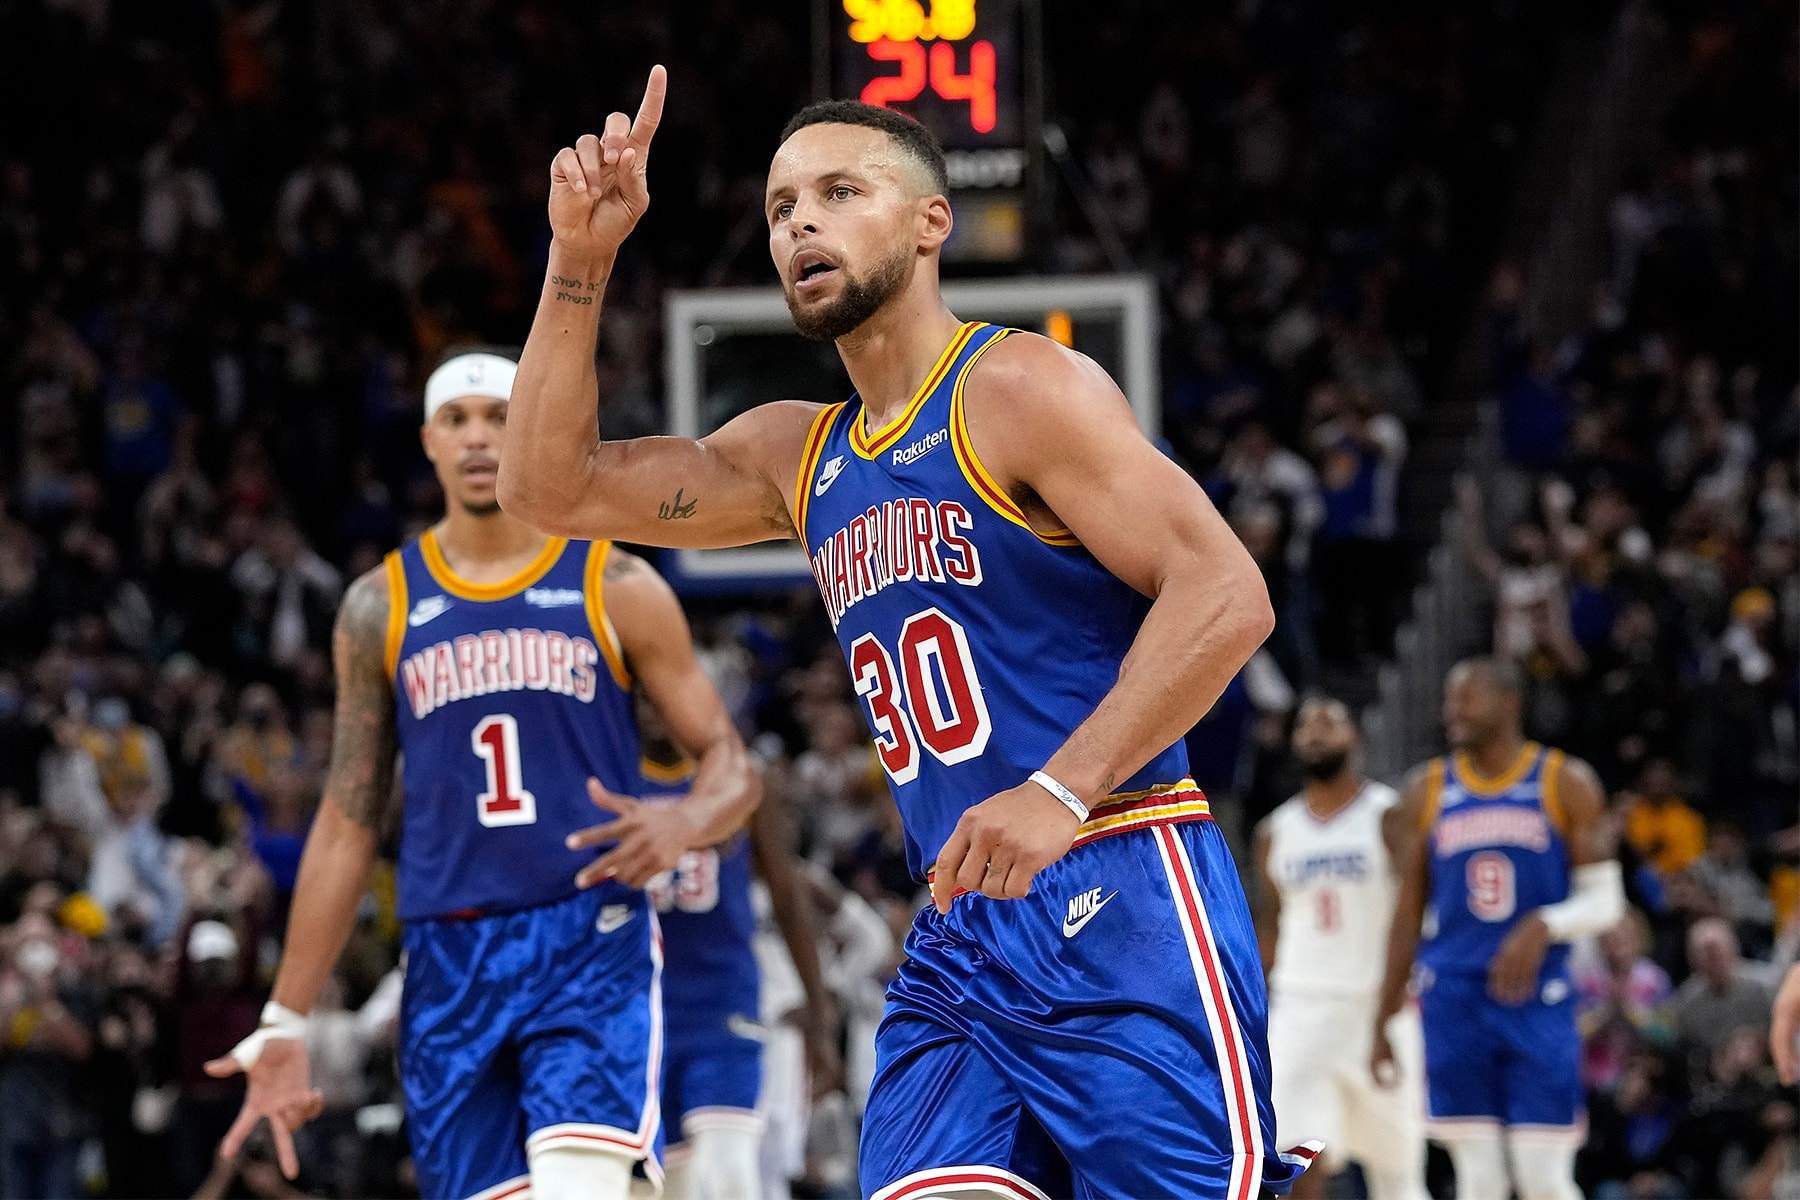 Stephen Curry 單節 25 分率隊擊敗 Los Angeles Clippers